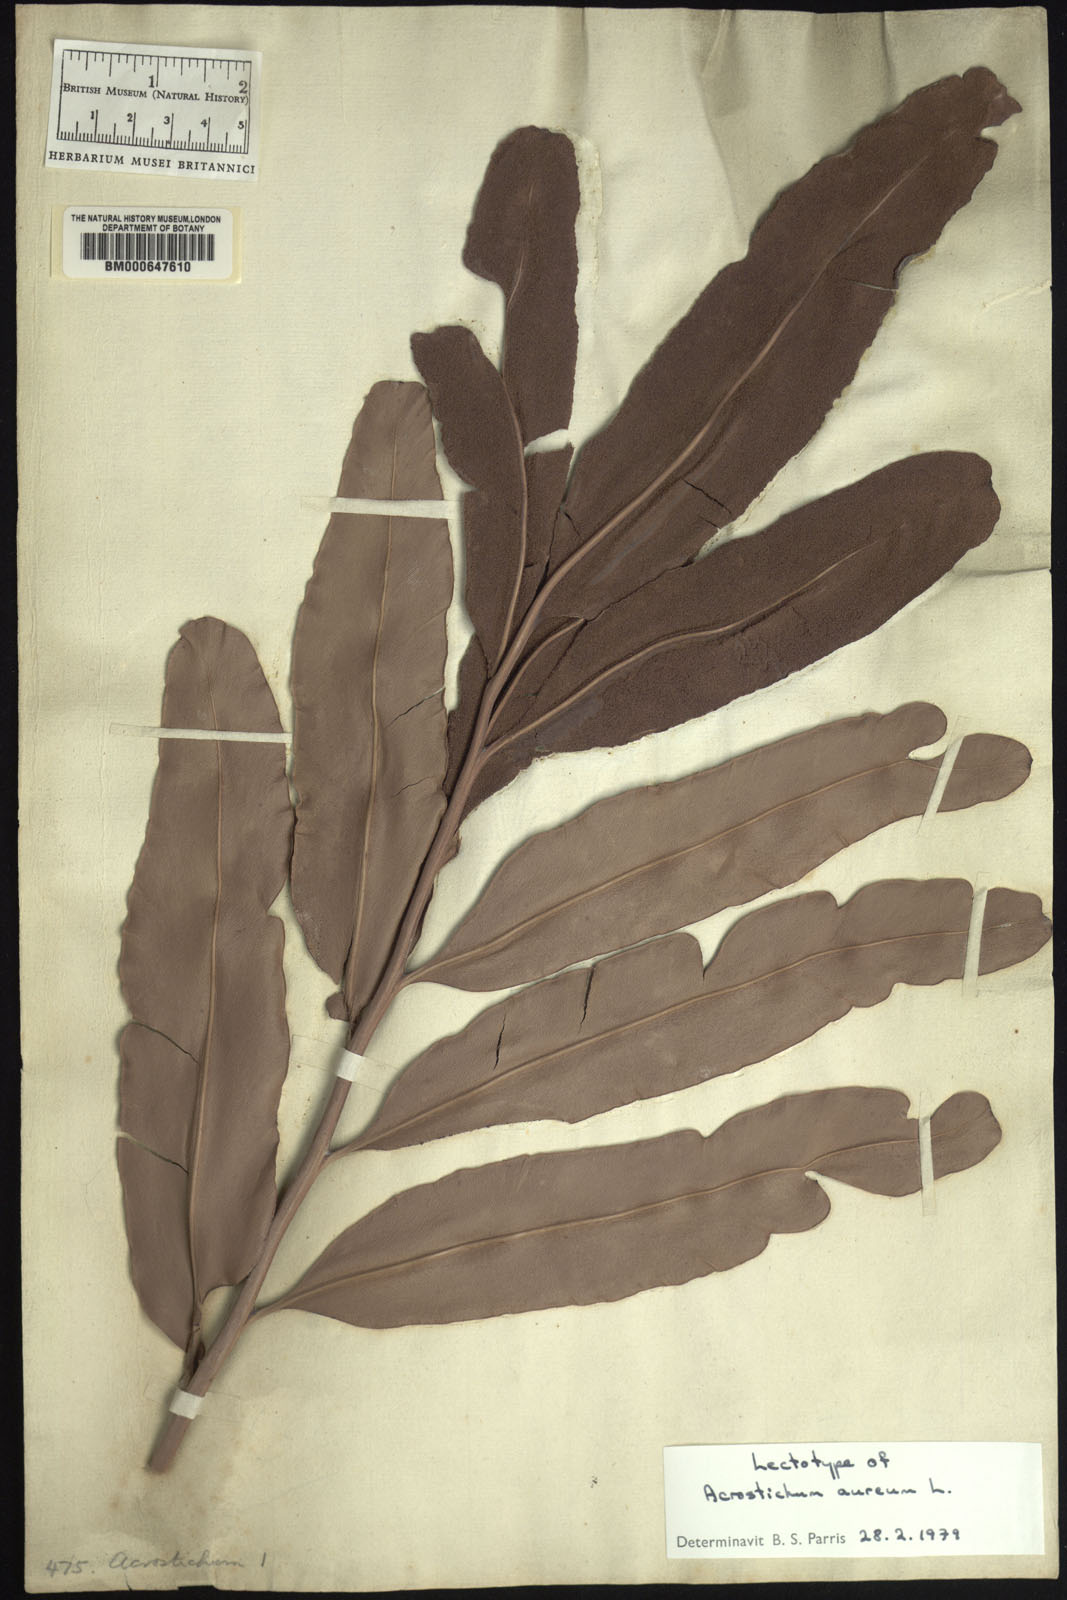 http://www.nhm.ac.uk//resources/research-curation/projects/clifford-herbarium/lgimages/BM000647610.JPG